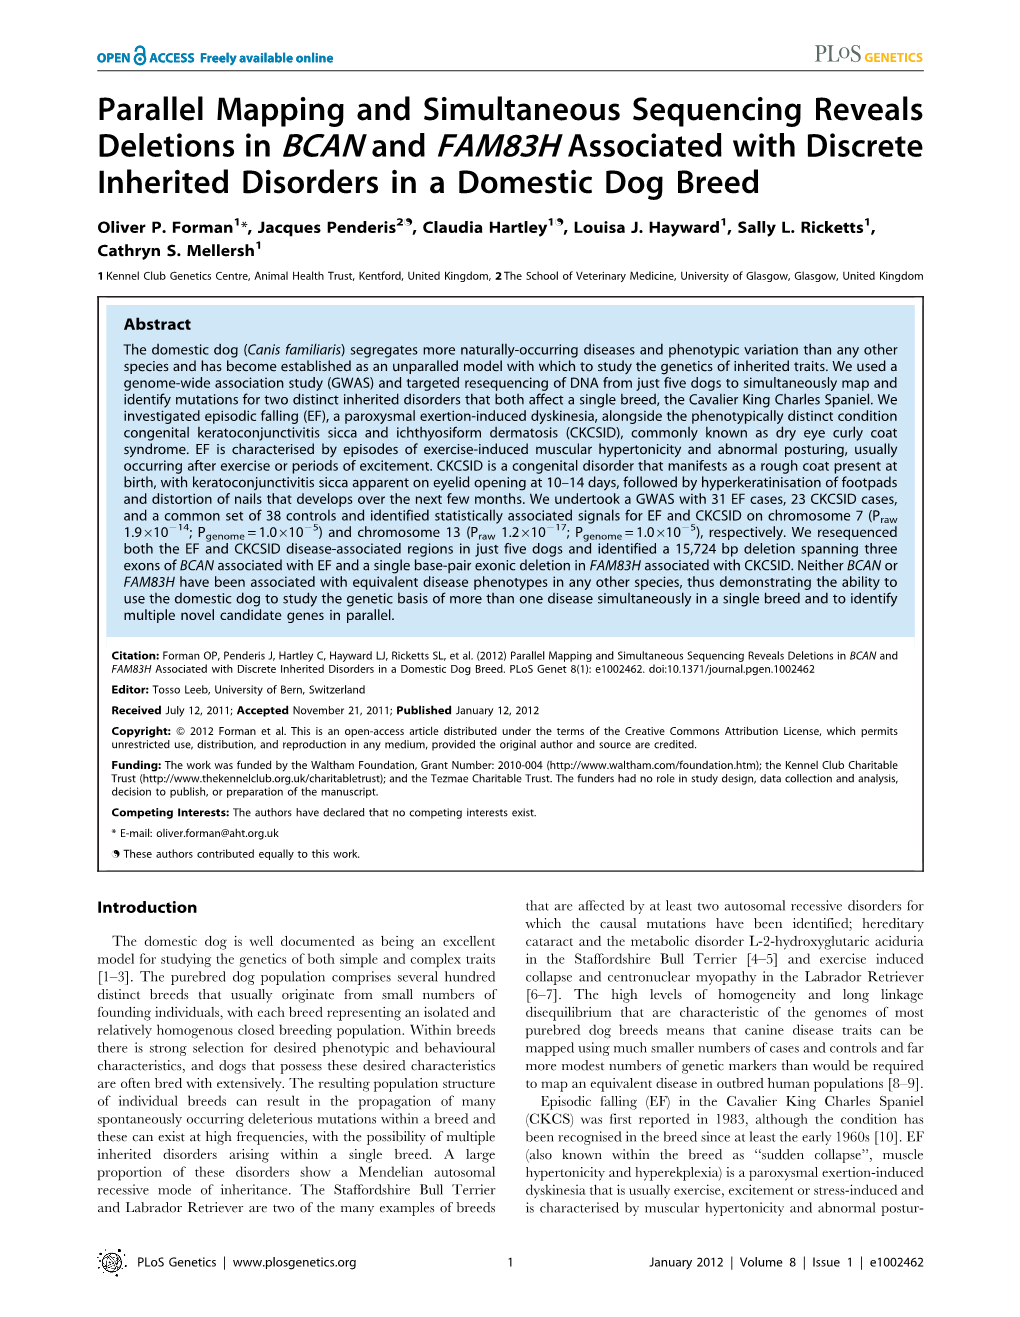 Parallel Mapping and Simultaneous Sequencing Reveals Deletions in BCAN and FAM83H Associated with Discrete Inherited Disorders in a Domestic Dog Breed